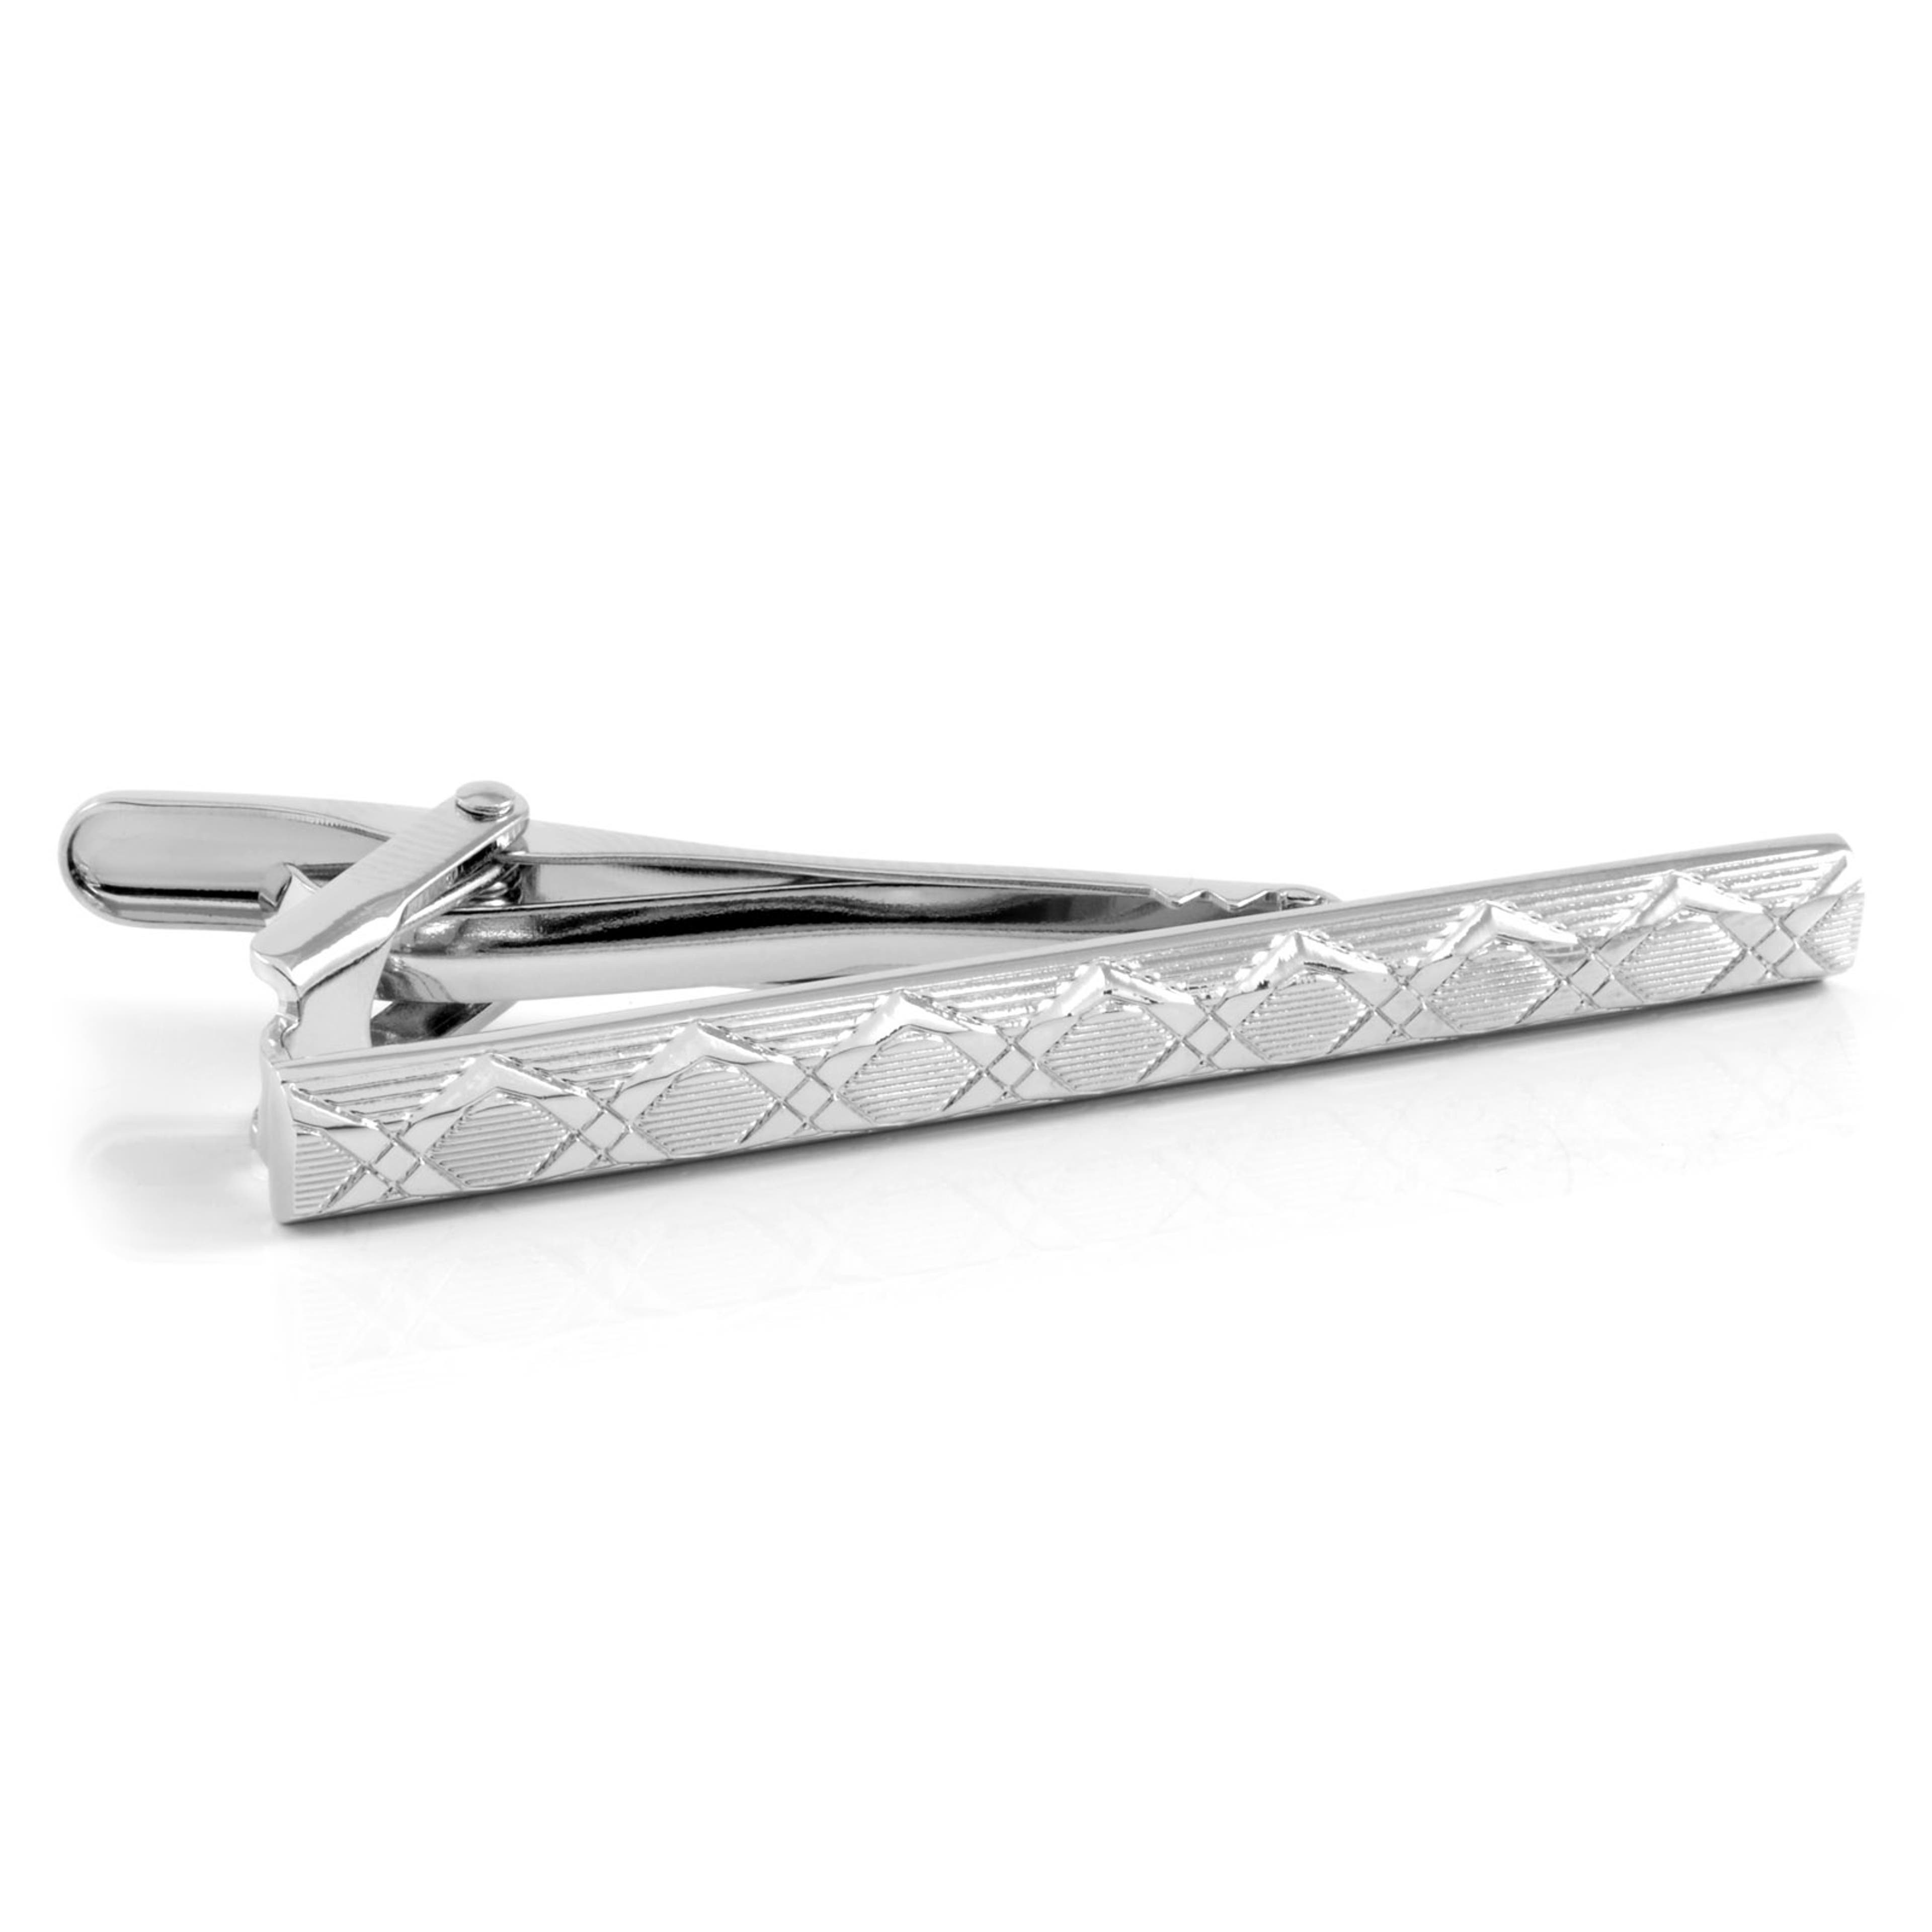 Silver-Tone Patterned Tie Clip